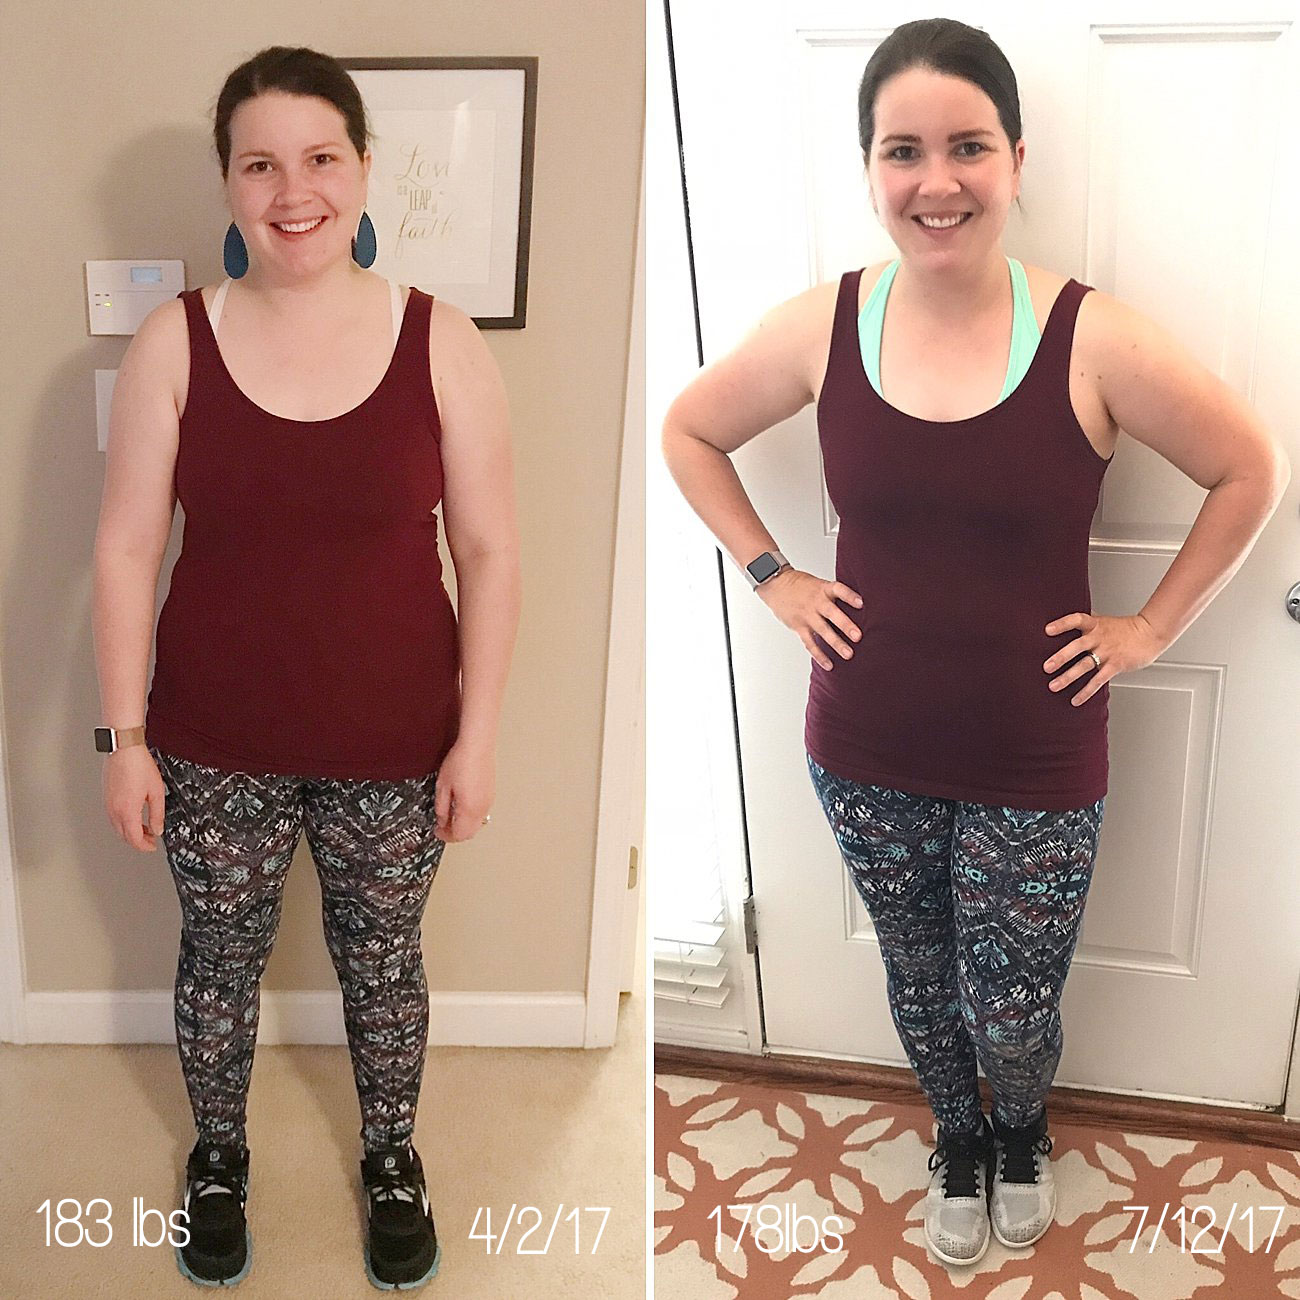 Why I Don't Want to Lose Weight by NC blogger Still Being Molly